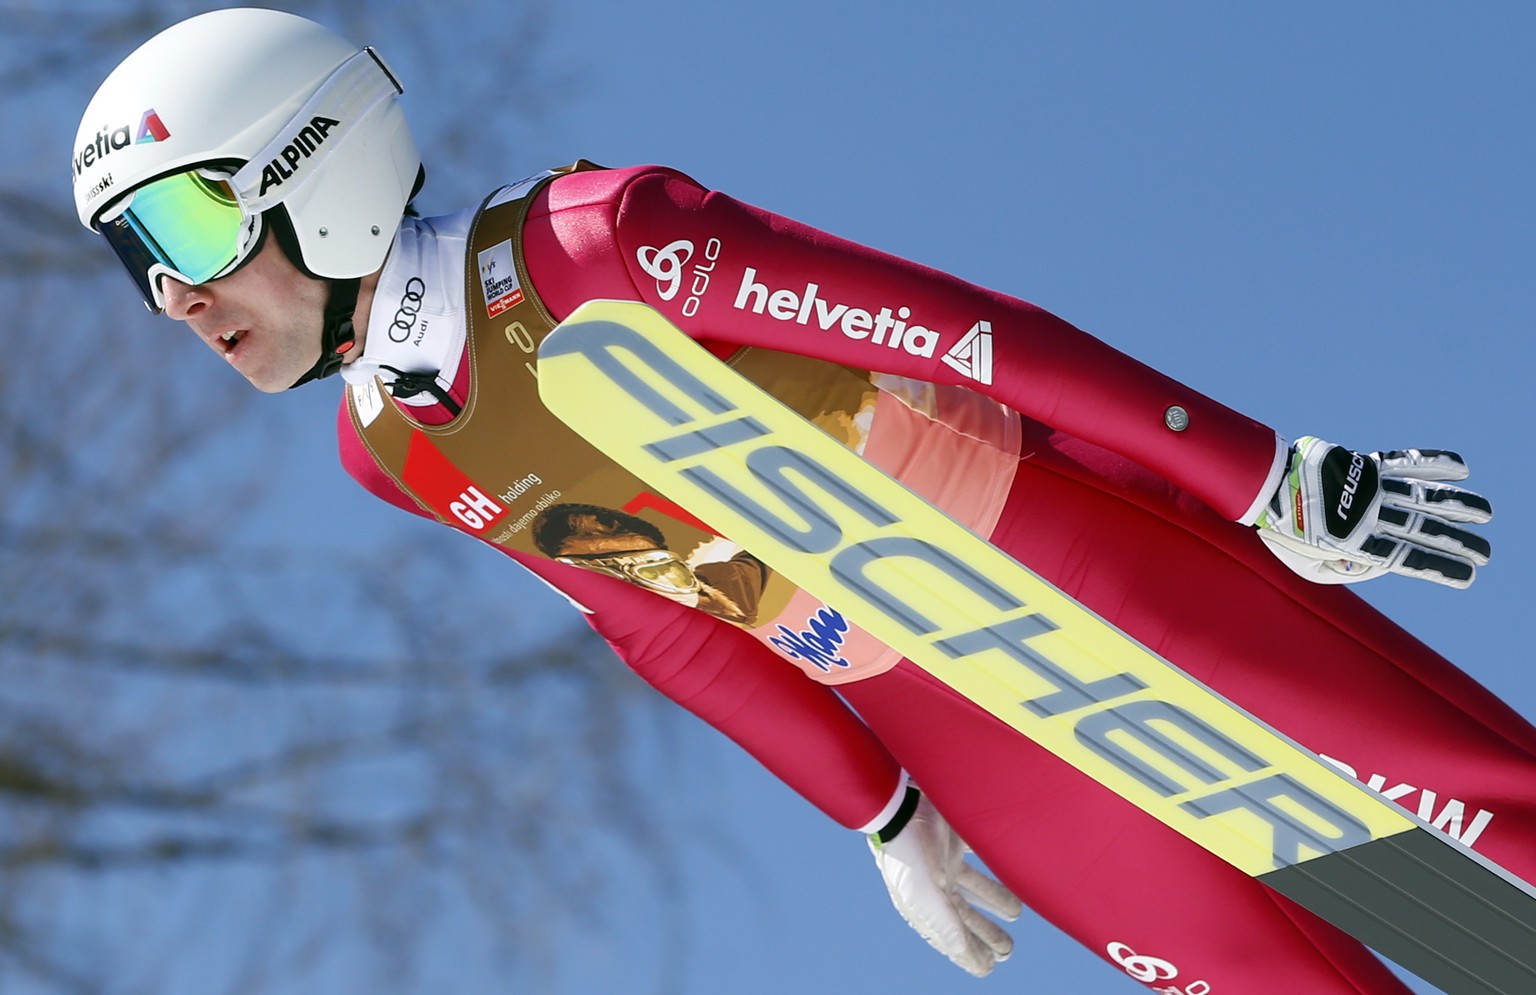 Simon Ammann of Switzerland competes to place eighth at the Ski Jumping World Cup individual event in Planica, Slovenia, Sunday, March 20, 2016. (AP Photo/Darko Bandic)